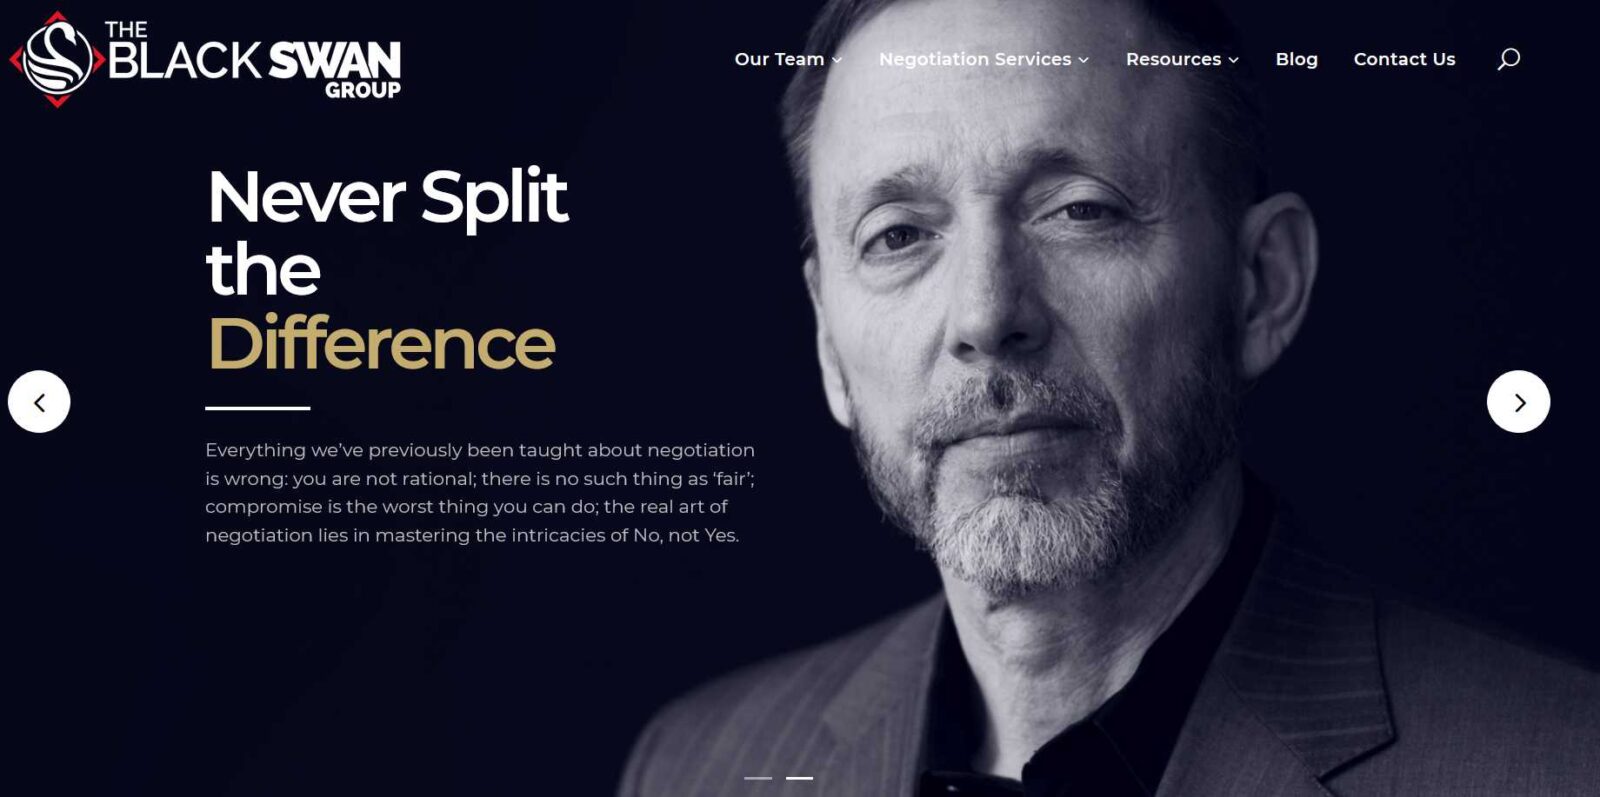 Chris-Voss-–-Never-Split-the-Difference-Negotiation-Course-Download